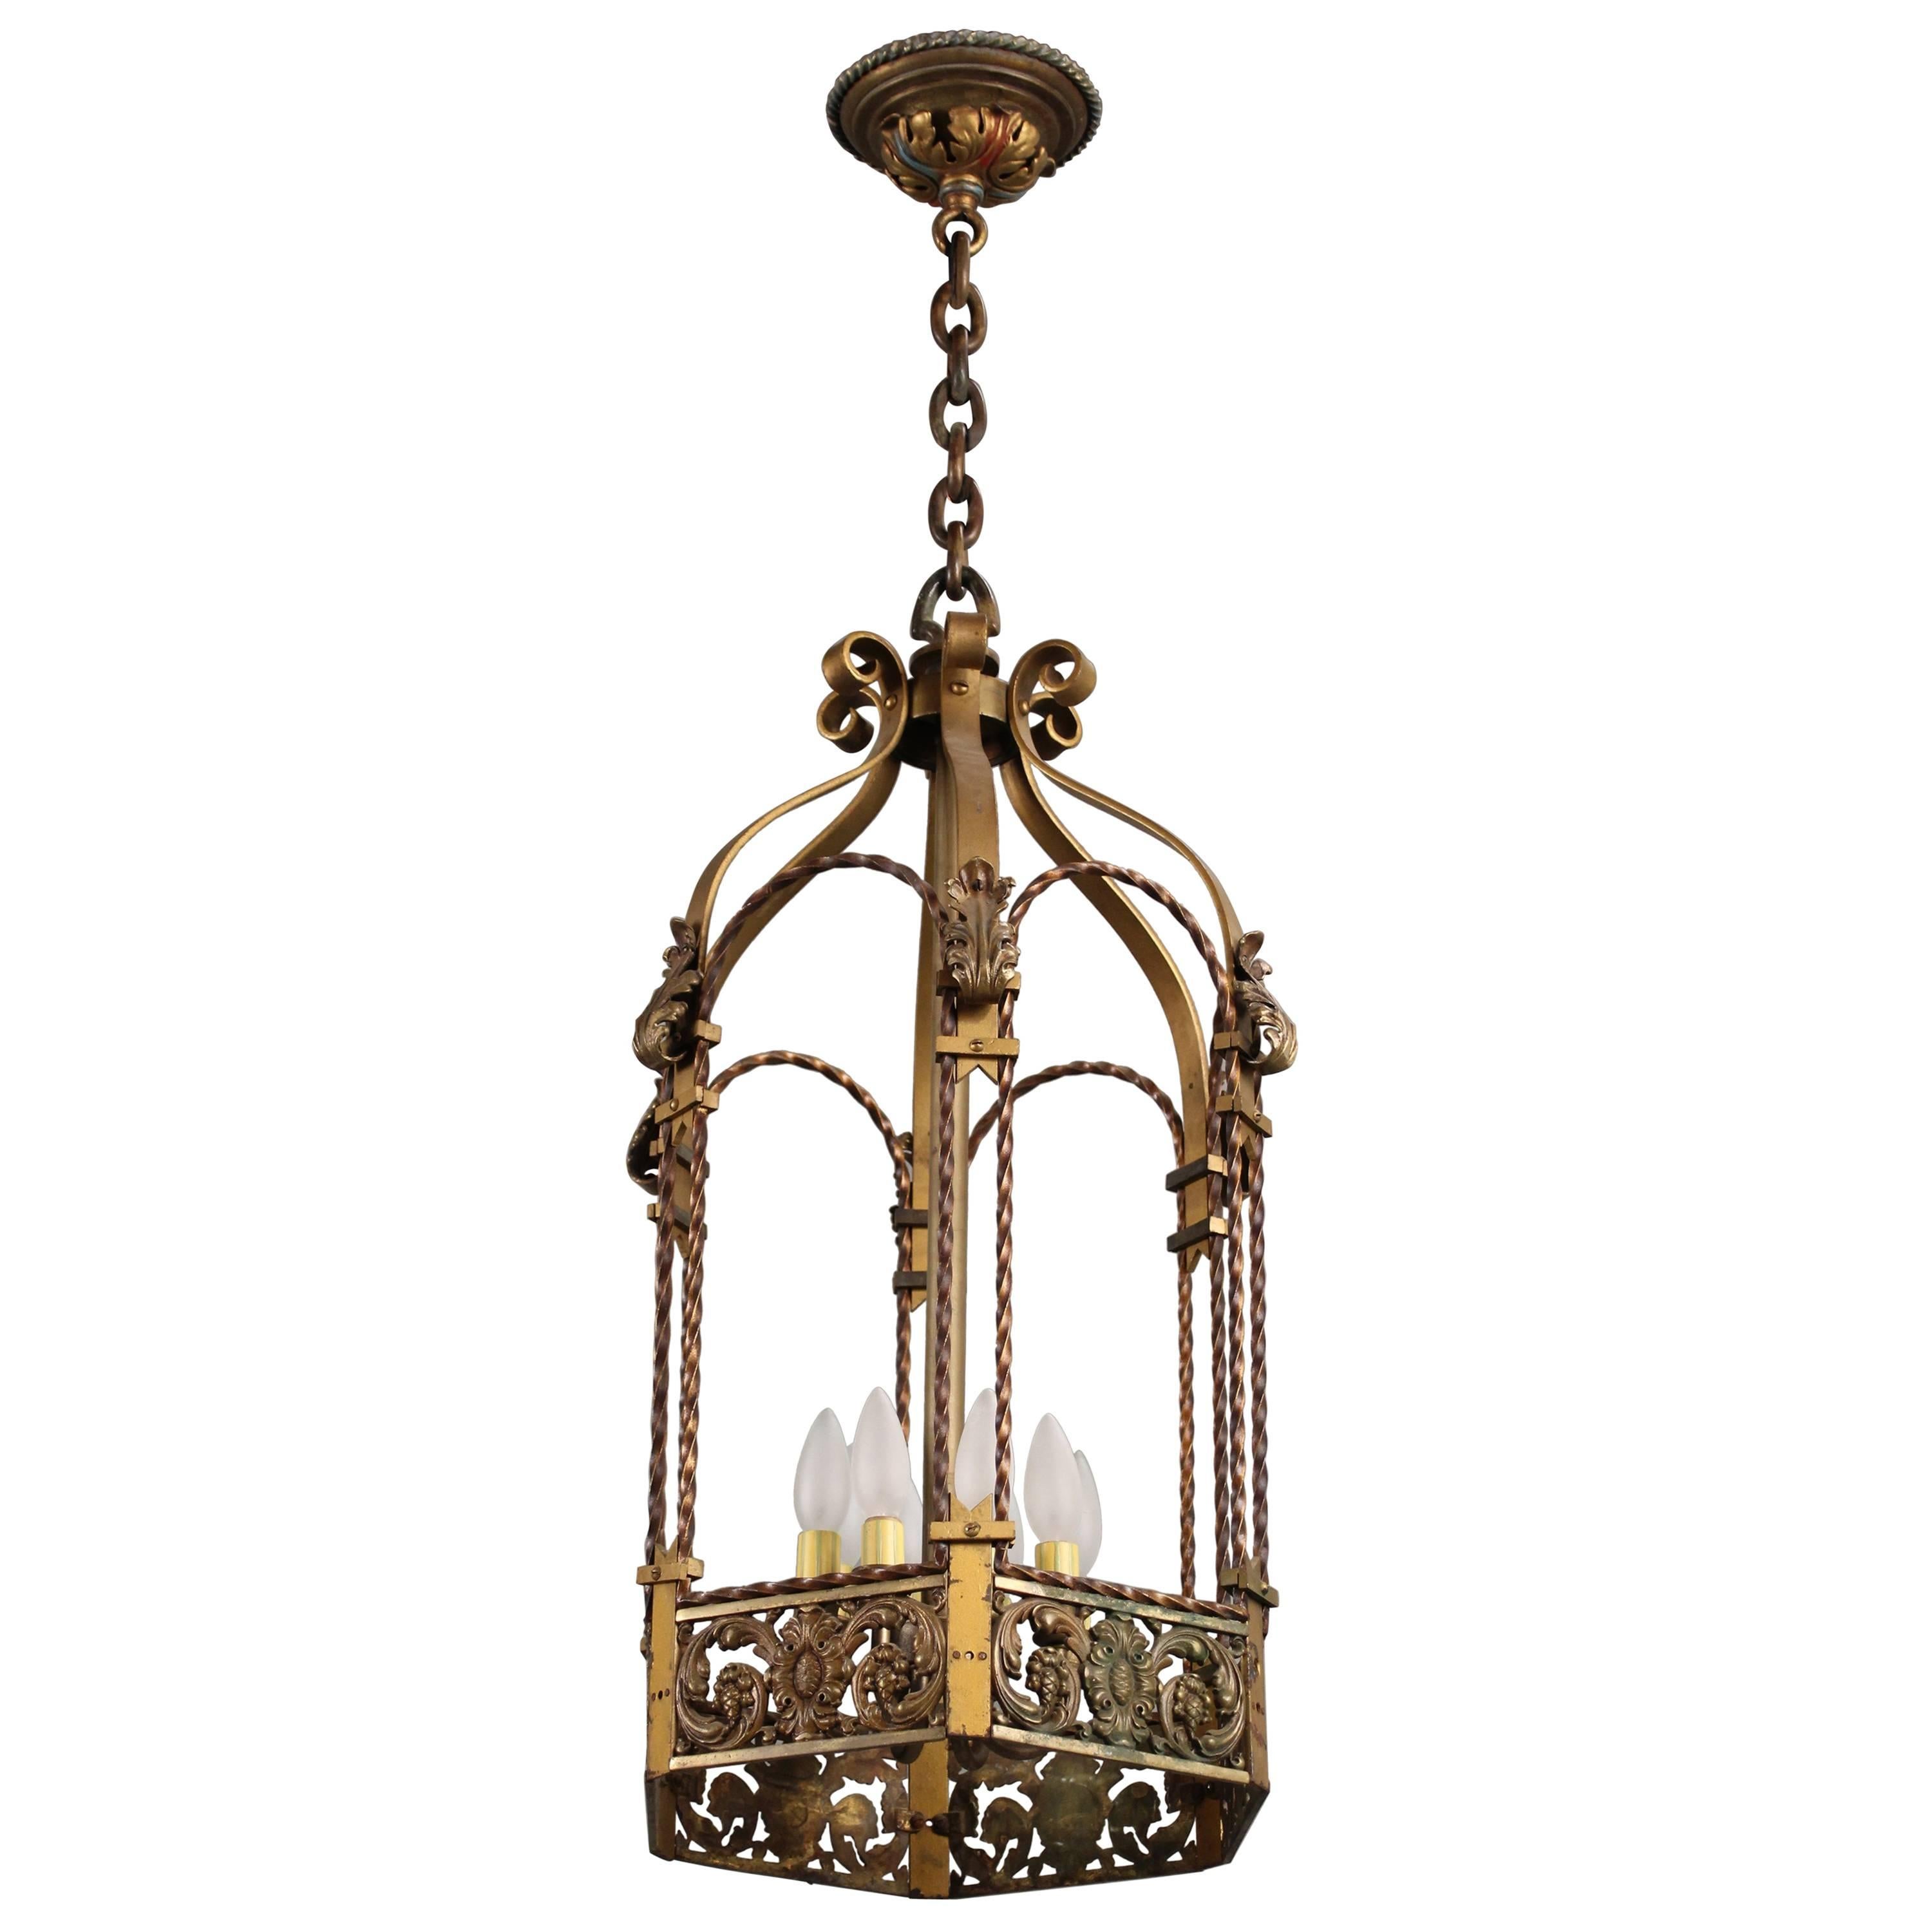 Large-Scale 1920s Spanish Revival Pendant For Sale